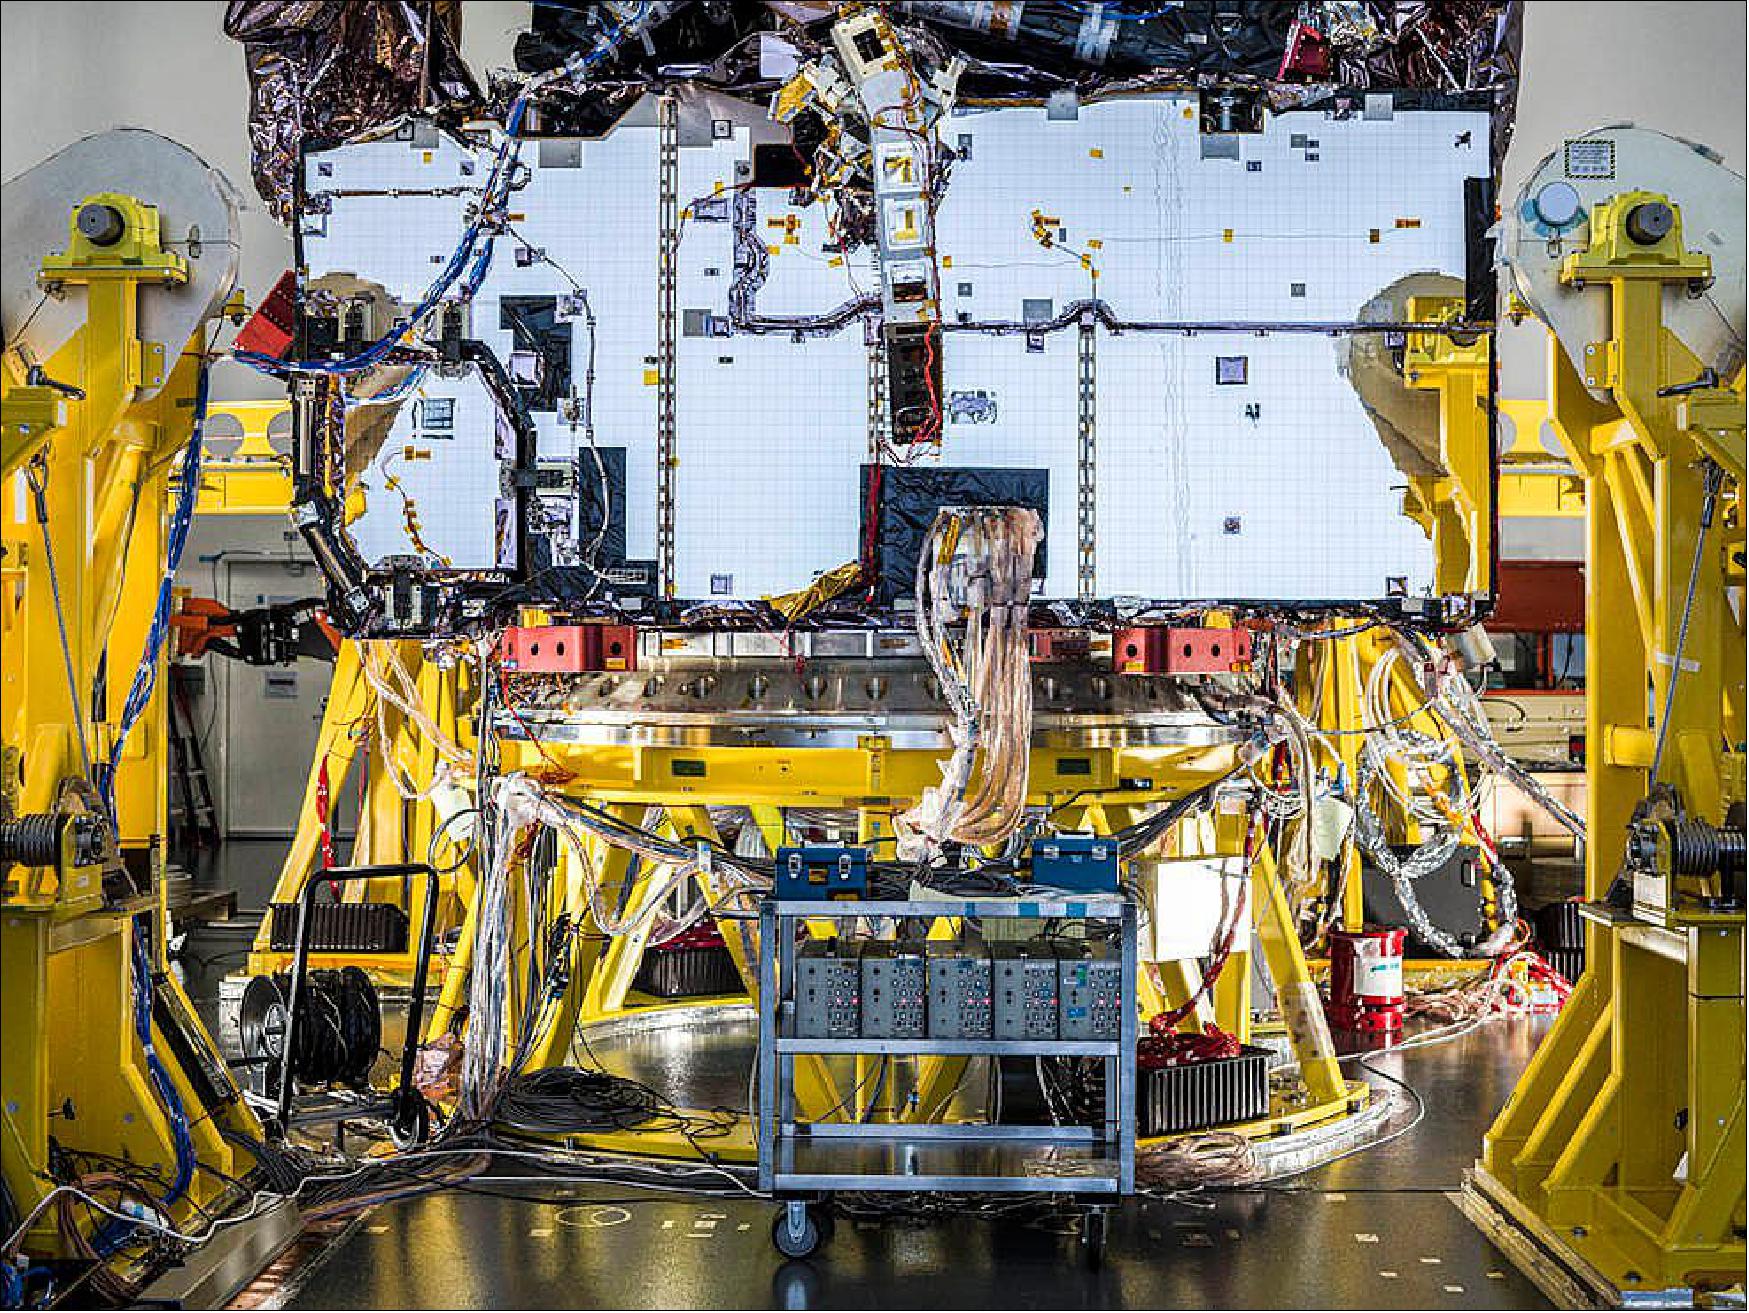 Figure 26: During its final full systems test, technicians powered on all of the James Webb Space Telescope's various electrical components installed on the observatory, and cycled through their planned operations to ensure each was functioning, and communicating with each other. — Following the conclusion of the James Webb Space Telescope's recent milestone tests, engineering teams have confirmed that the observatory will both mechanically, and electronically survive the rigors anticipated during launch (image credit: NASA/Chris Gunn)